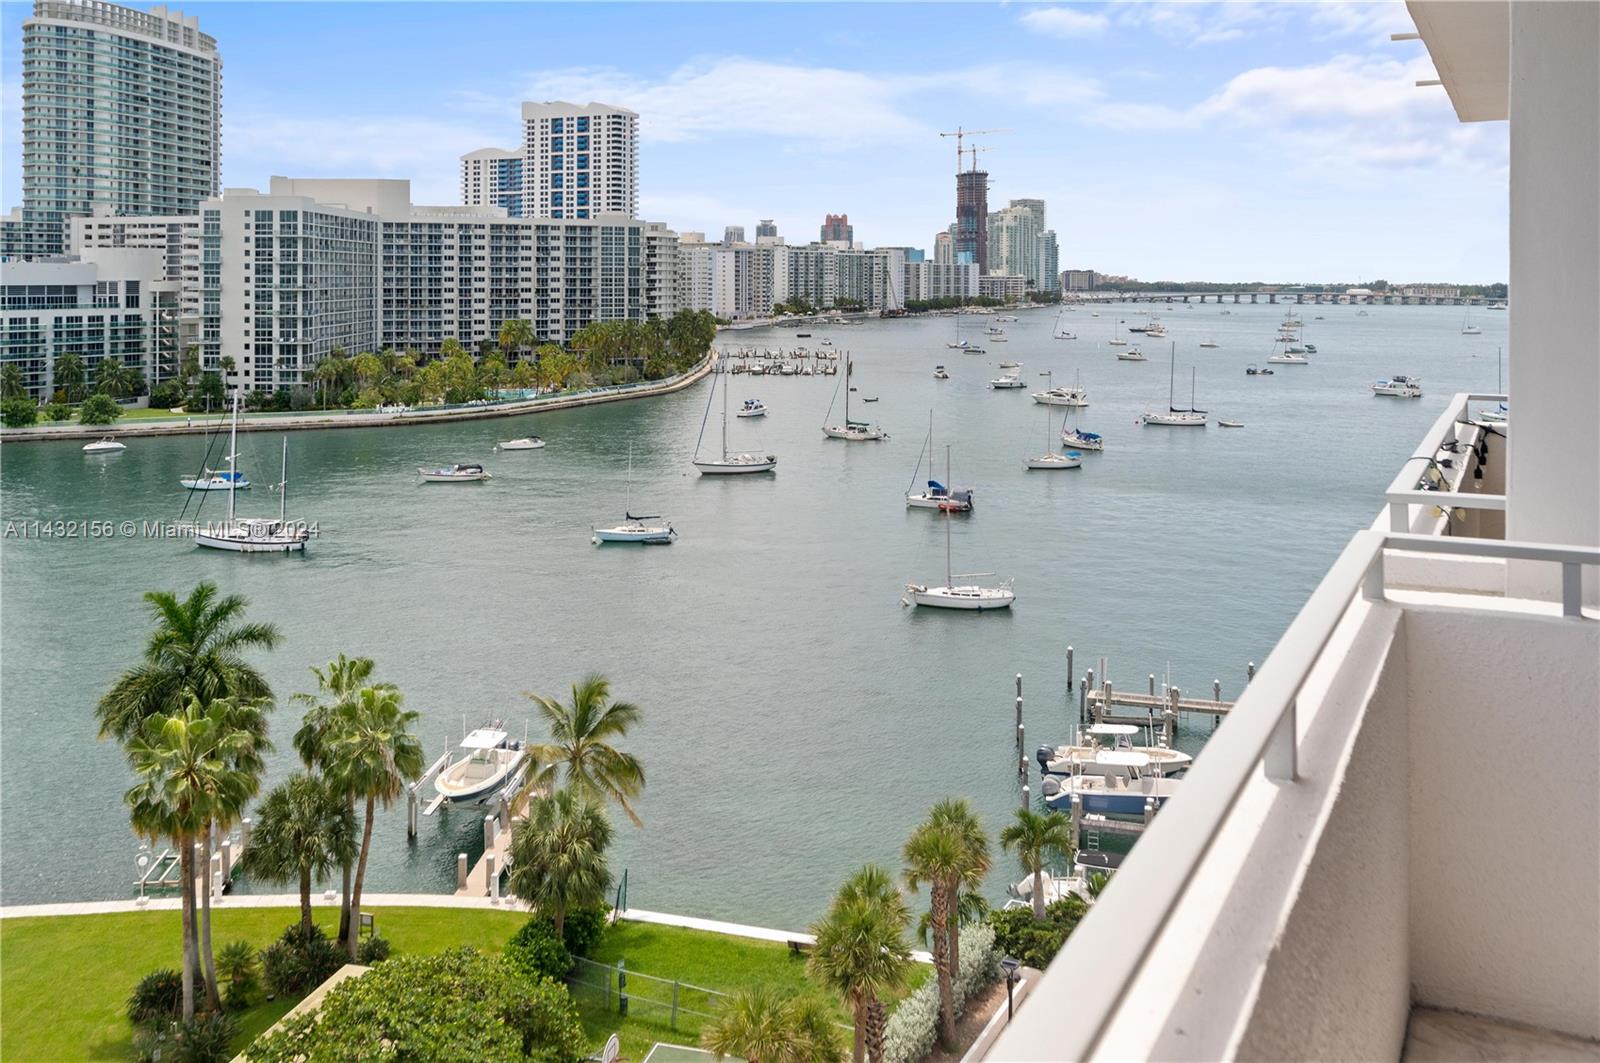 11  Island Ave #1006 For Sale A11432156, FL